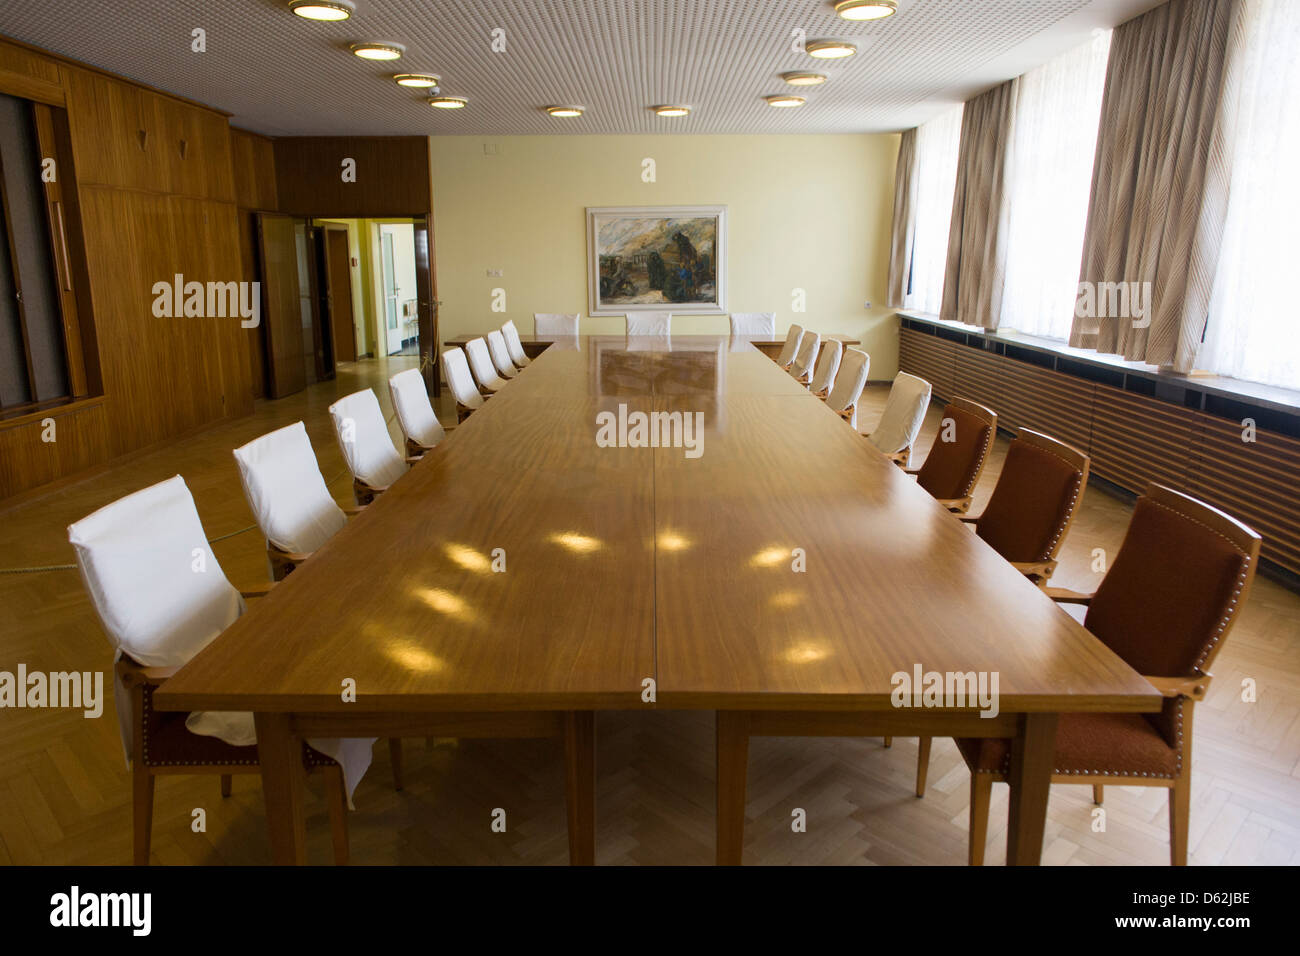 The conference room where the heads of the GDR secret police met with district administrators, an exhibit in 'Haus 1' the ministerial headquarters of the Stasi secret police in Communist East Germany, the GDR.  .. (More caption in Description) Stock Photo